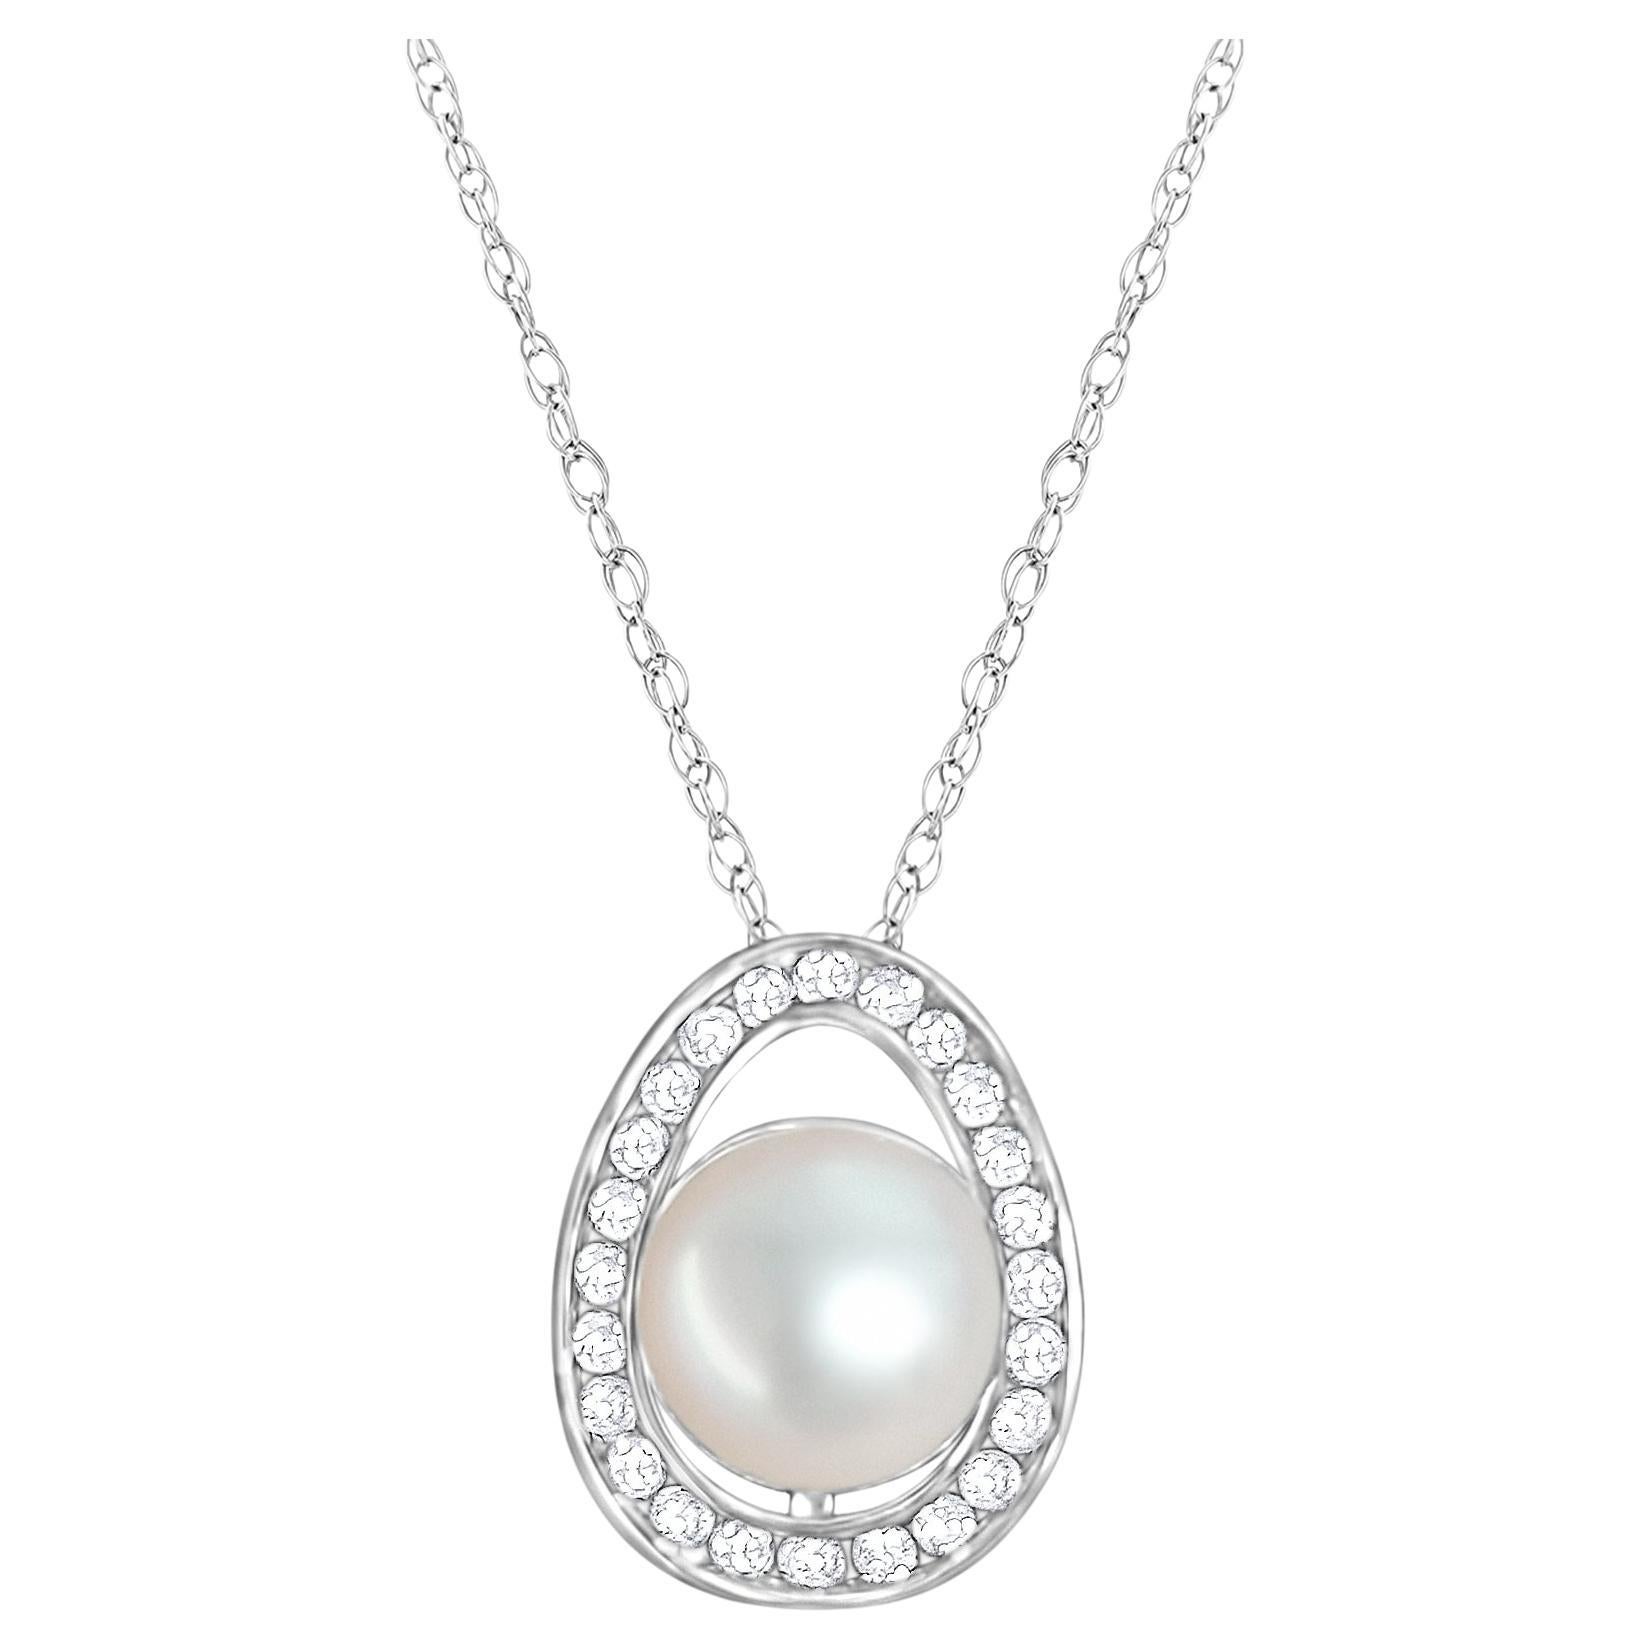 12MM Freshwater Pearl & Diamond Necklace .90cttw 18k White gold